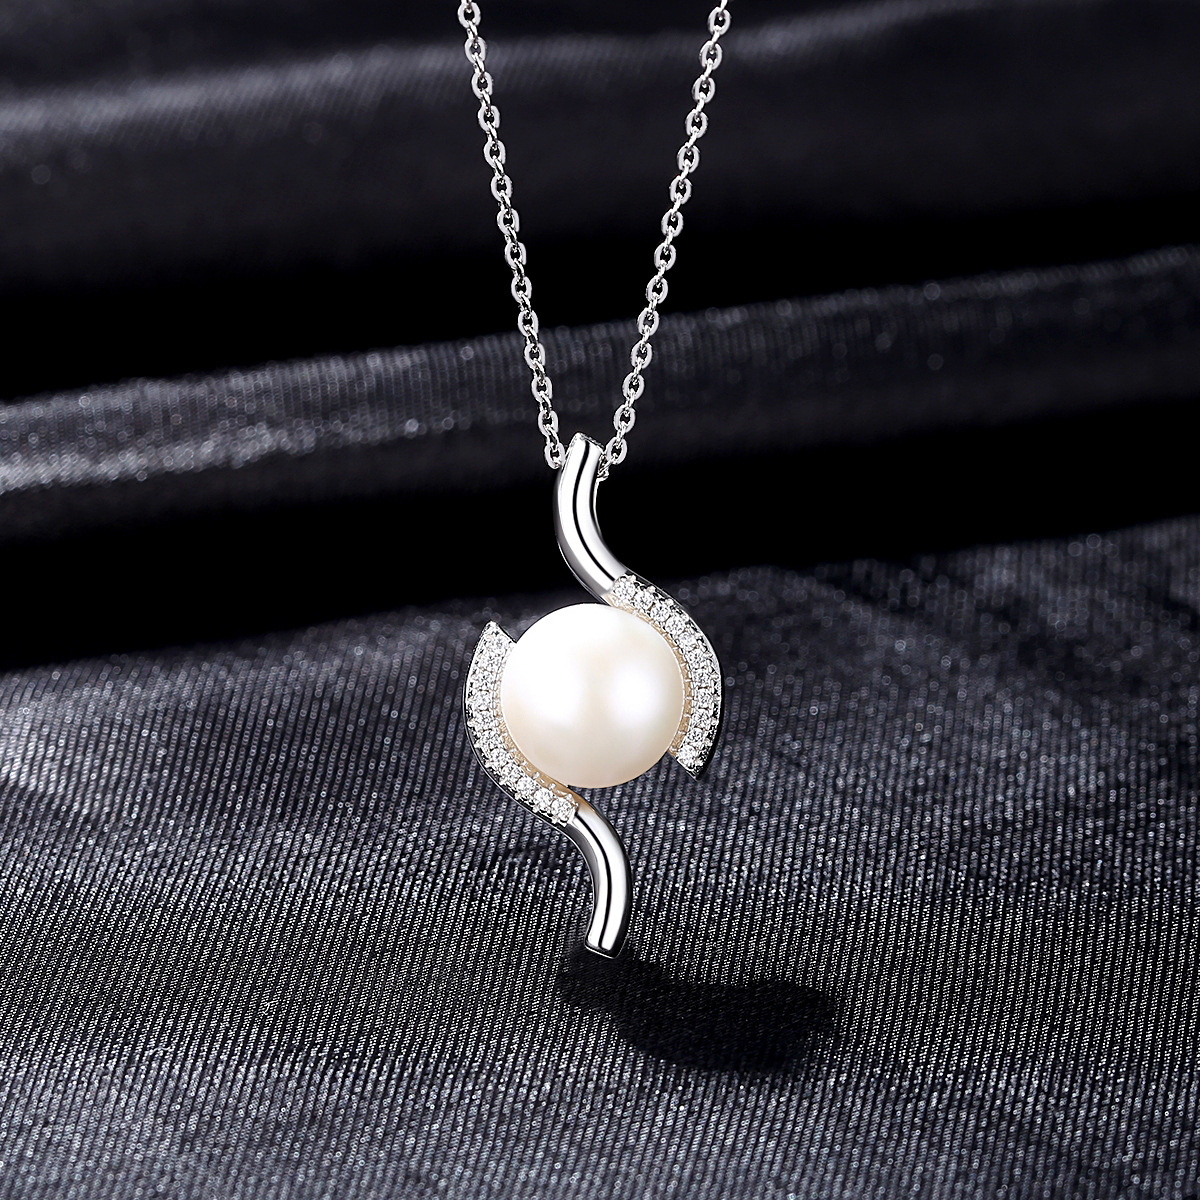 Rhodium Plated Cz Freshwater Pearl Pendant Sterling Silver Necklace